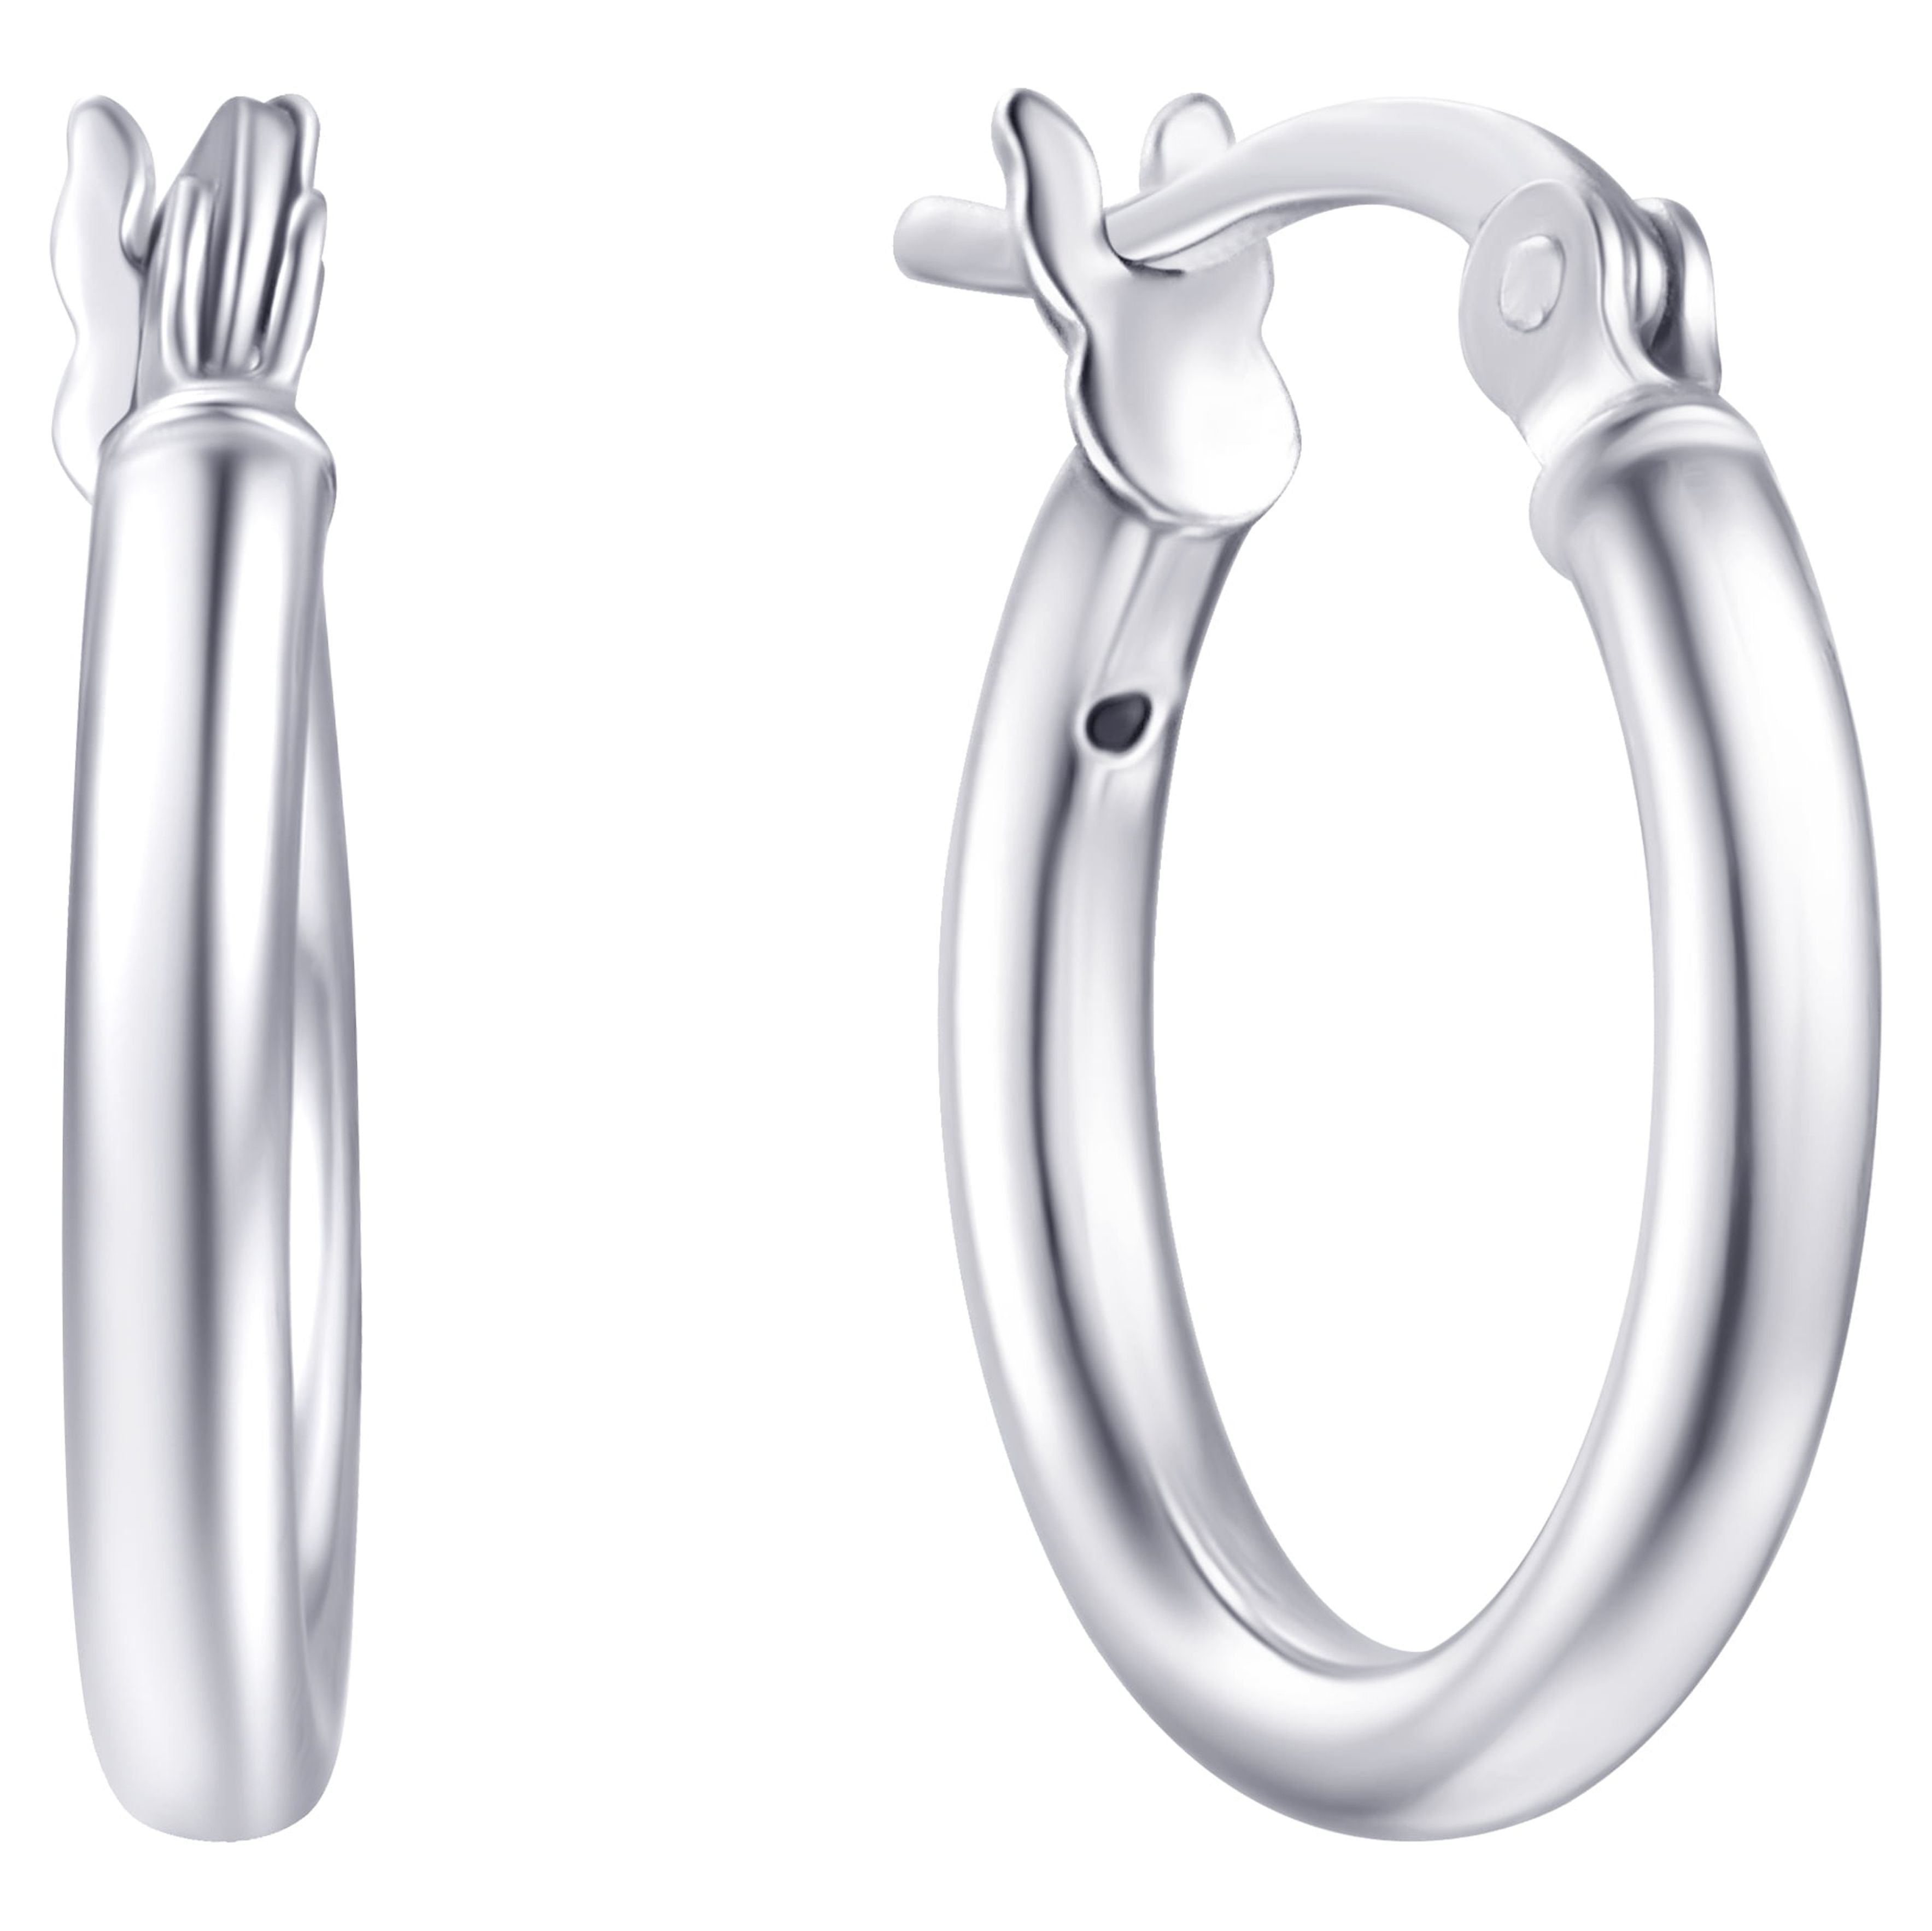 Brilliance Fine Jewelry Click Top Hoop Earrings in Sterling Silver 15MM - image 1 of 5